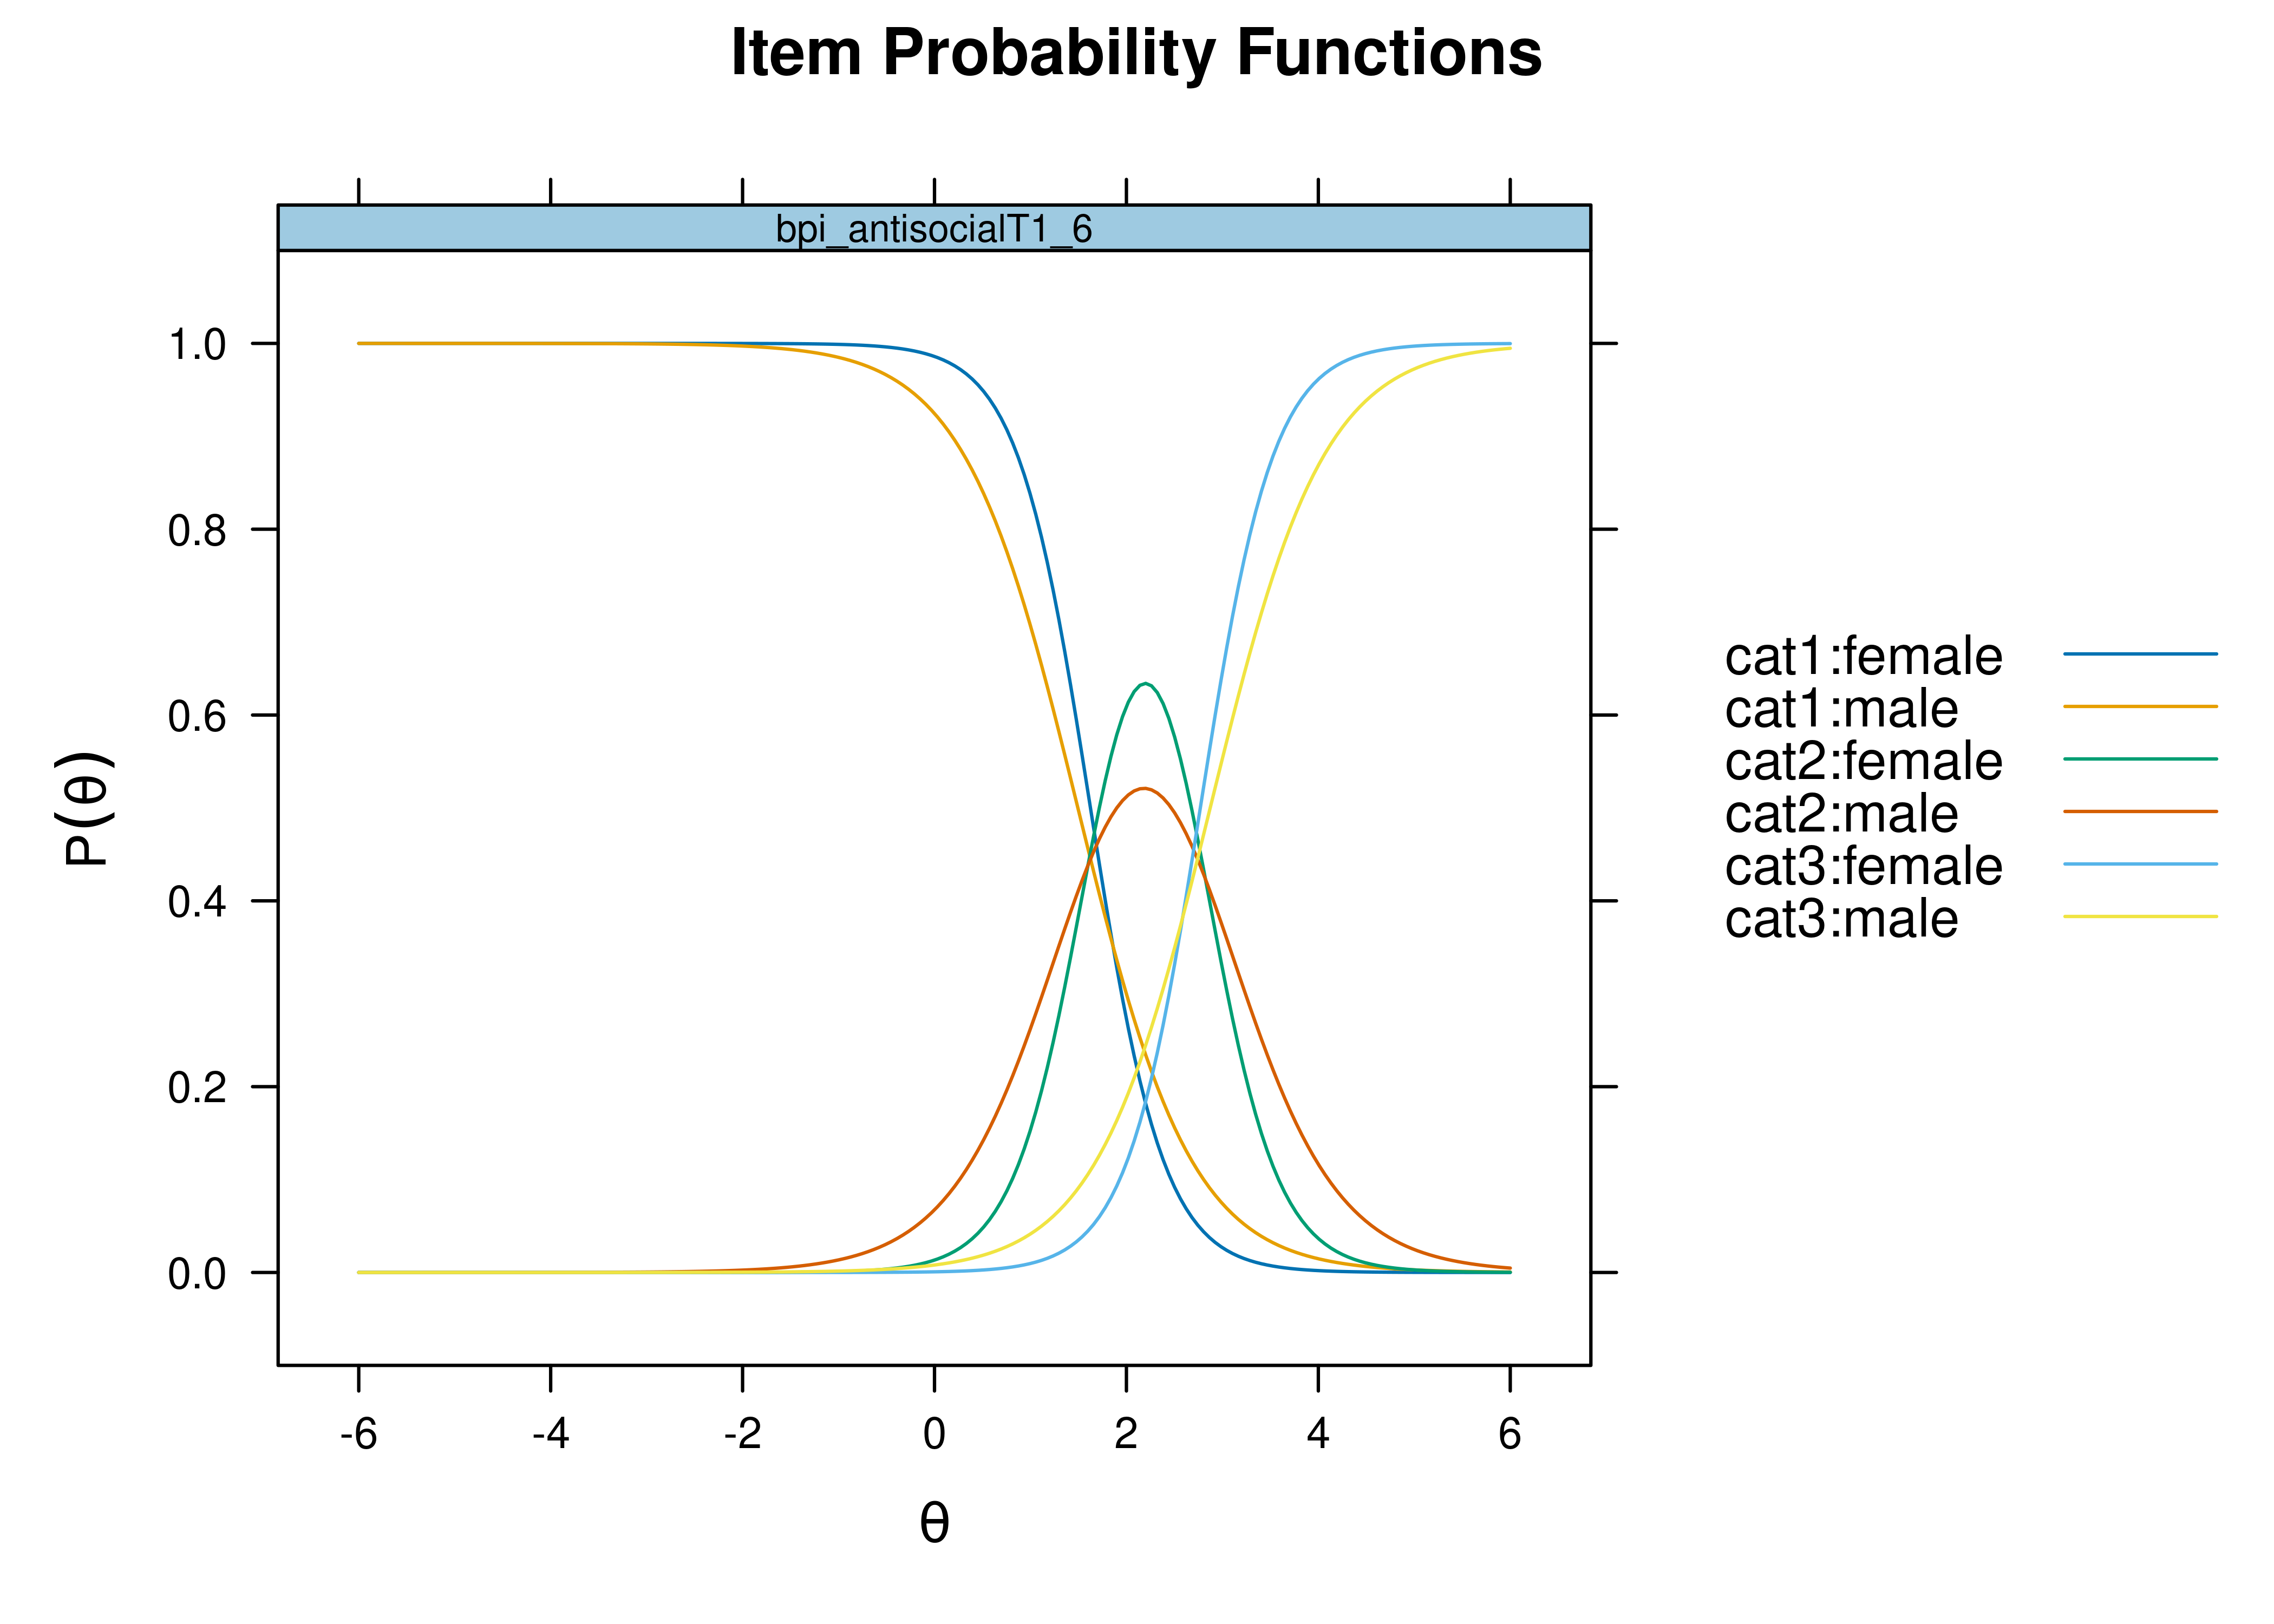 Item Probability Functions for Examining Differential Item Functioning in Terms of Discrimination.